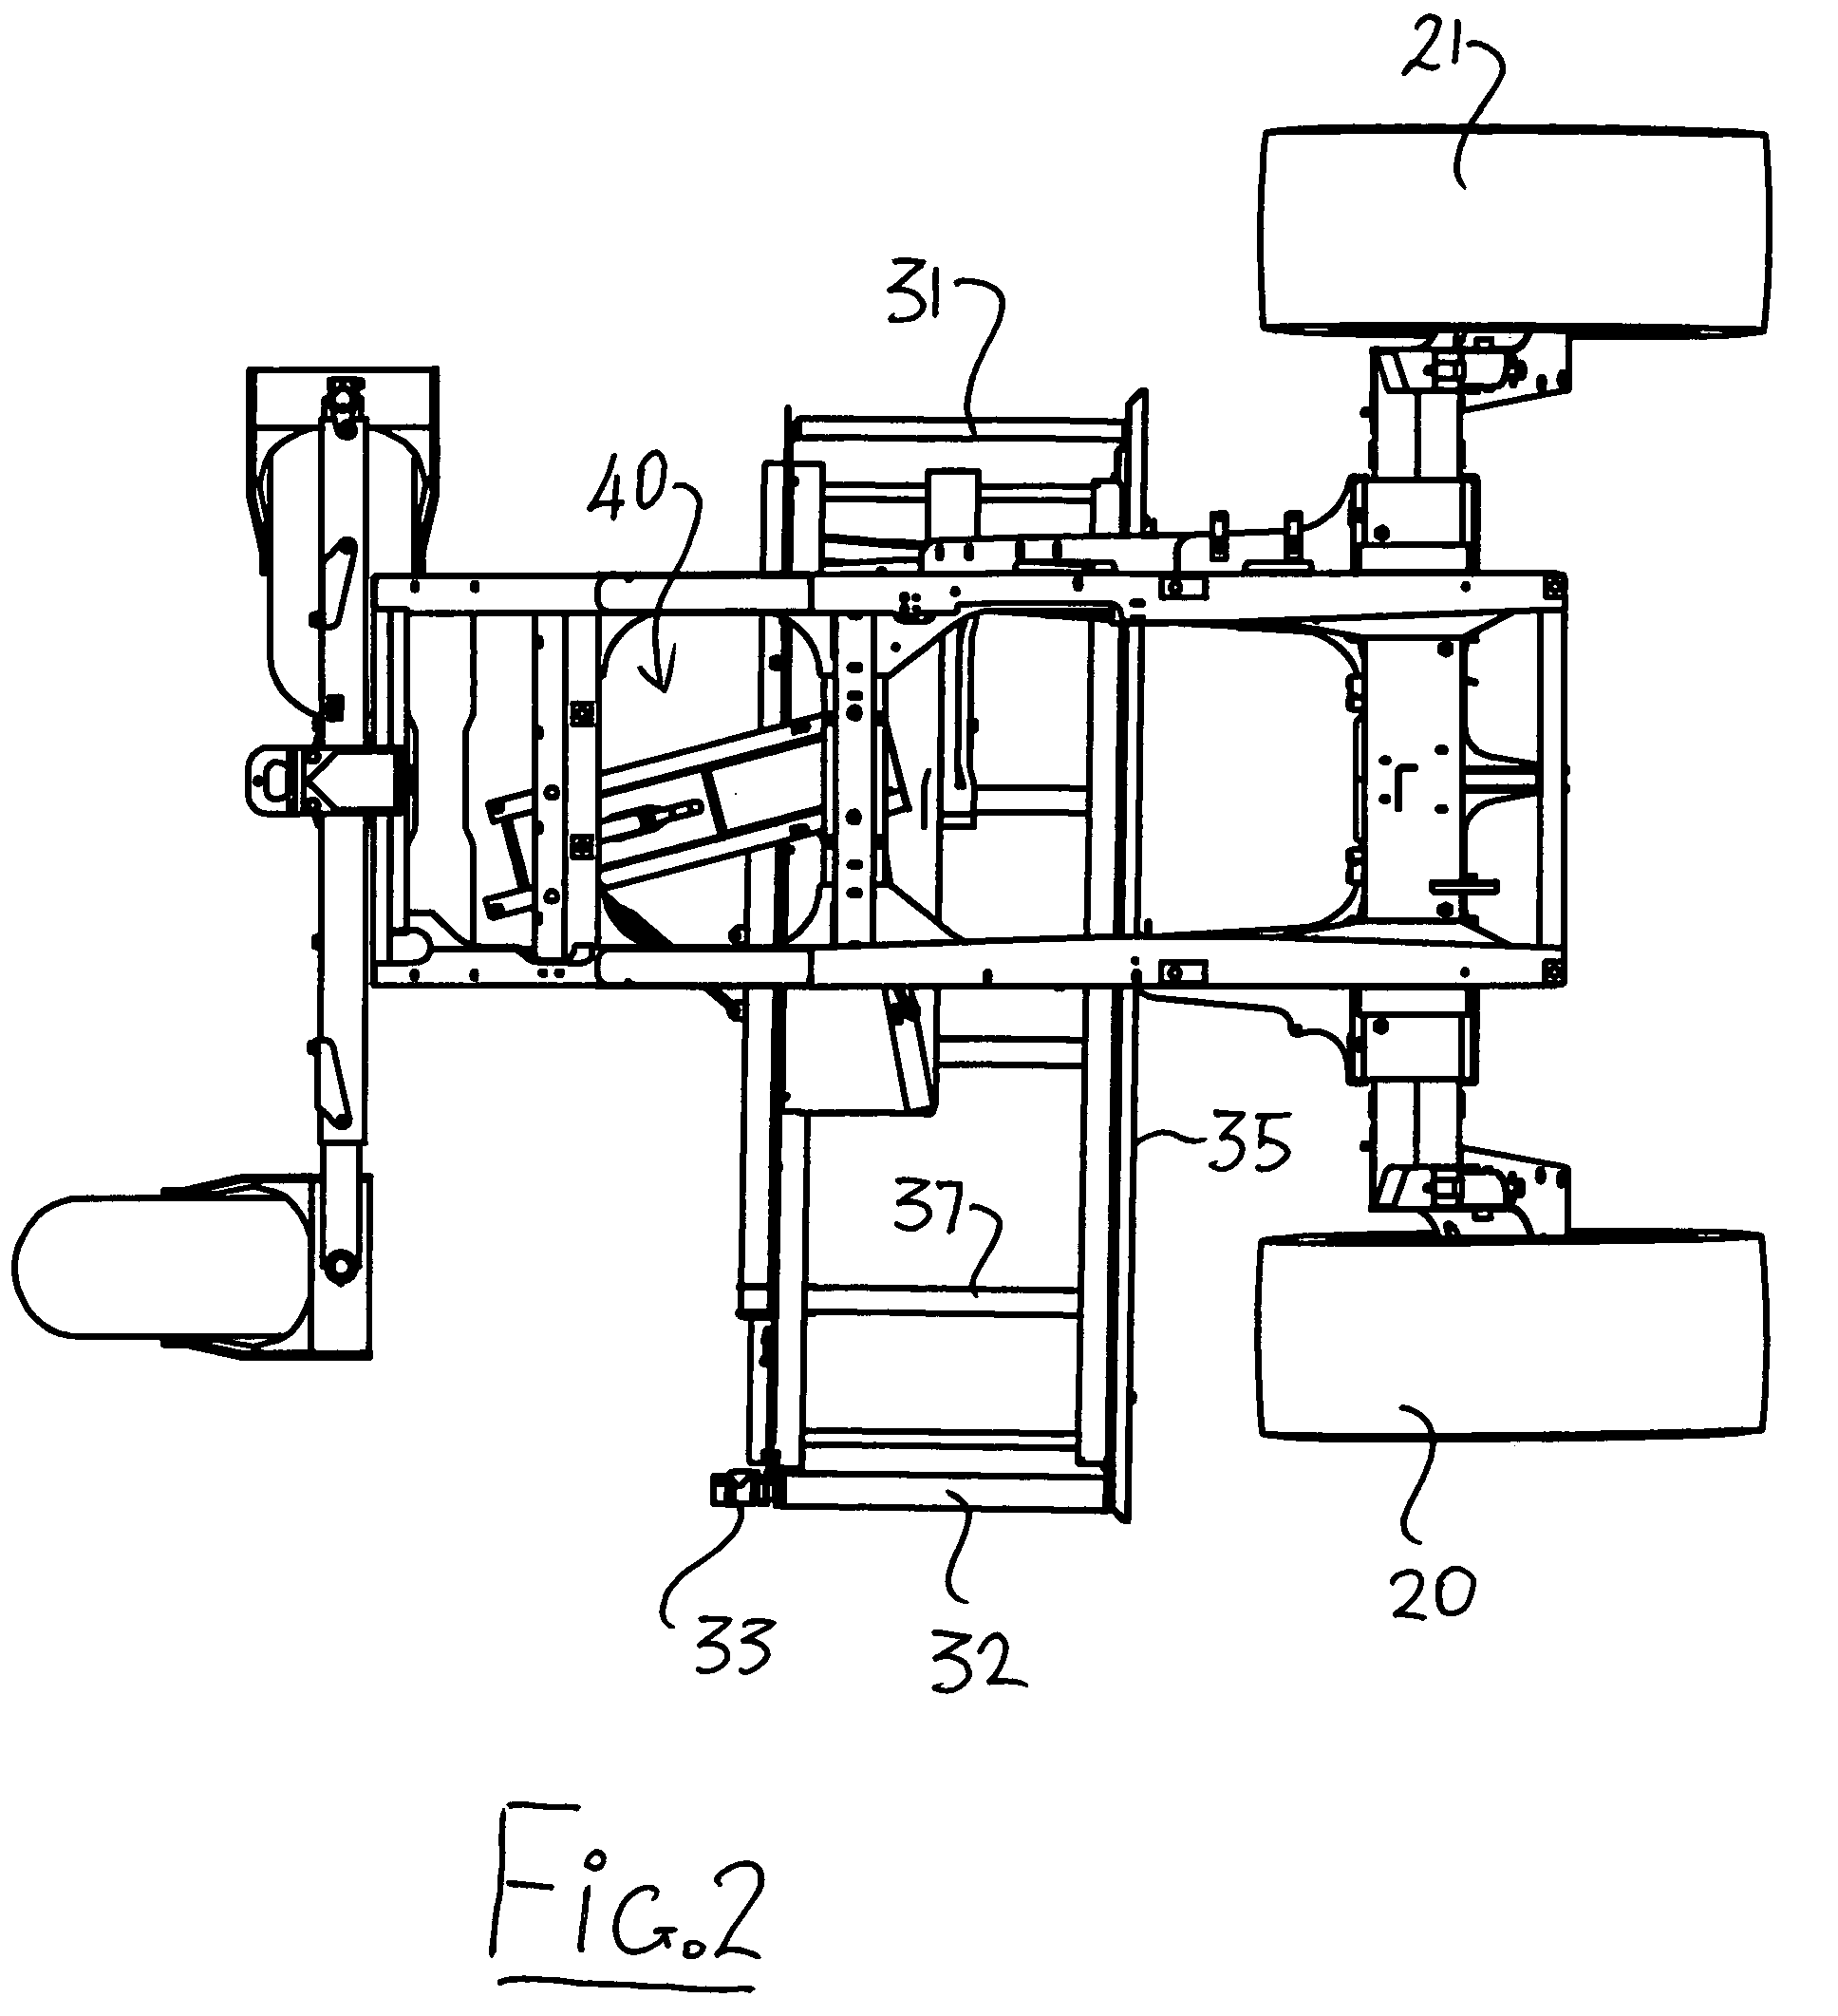 Operating and storage positions of a swather conveyor